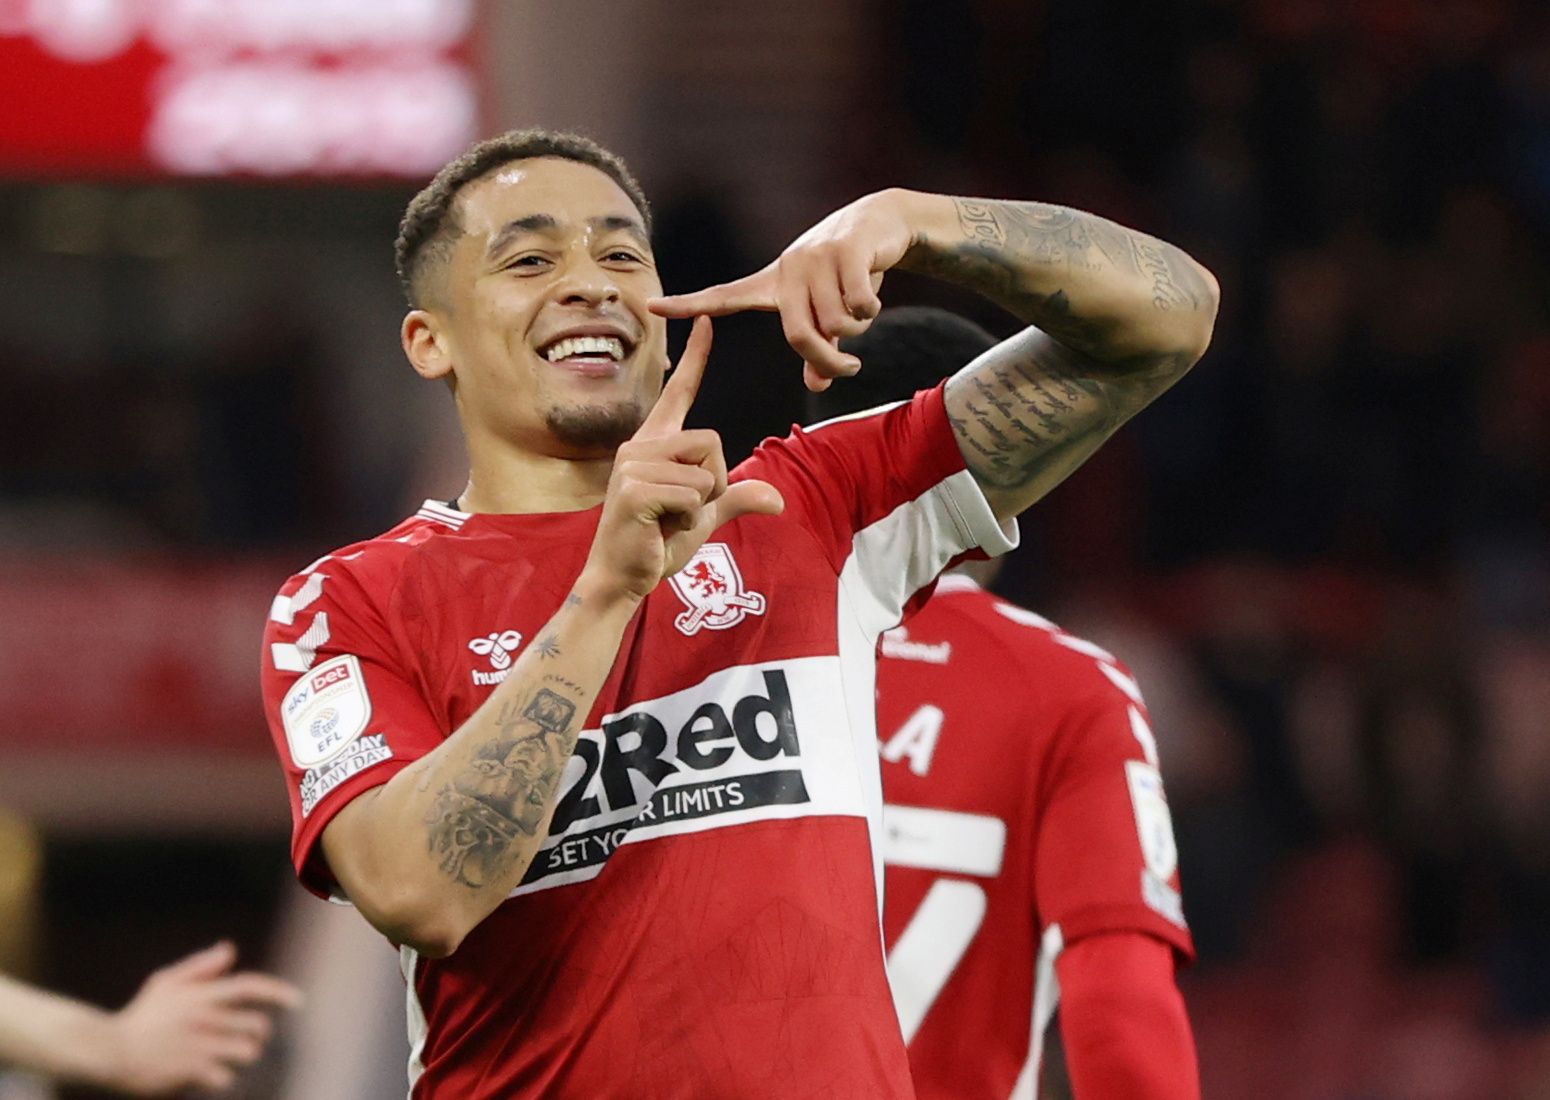 Soccer Football - Championship - Middlesbrough v Cardiff City - Riverside Stadium, Middlesbrough, Britain - April 27, 2022   Middlesbrough's Marcus Tavernier celebrates scoring their first goal   Action Images/Molly Darlington    EDITORIAL USE ONLY. No use with unauthorized audio, video, data, fixture lists, club/league logos or 